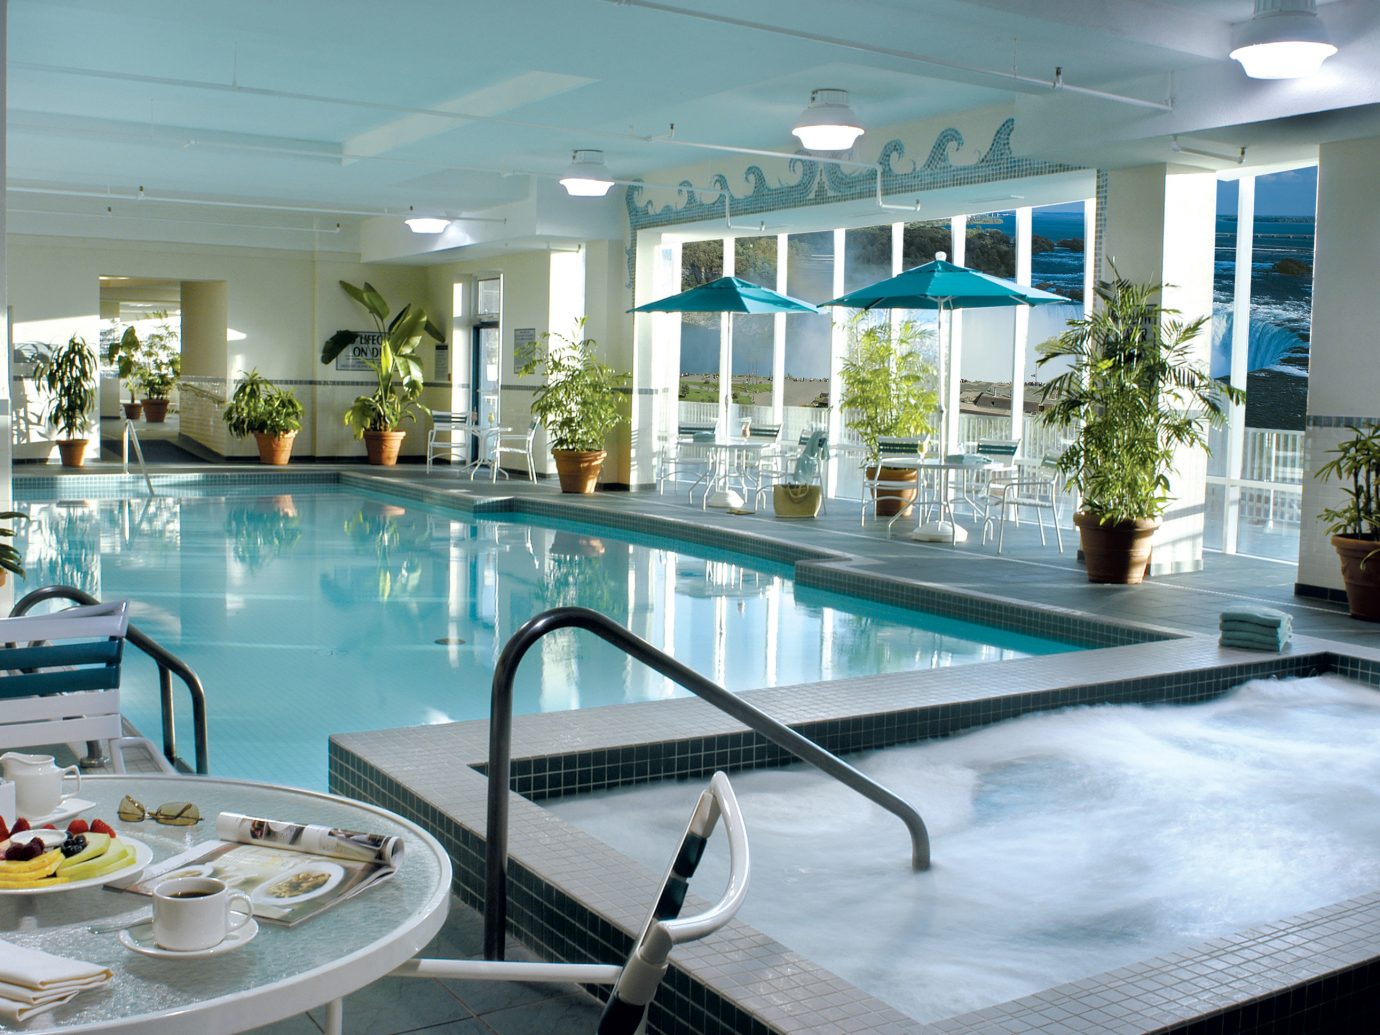 Hotels table indoor swimming pool property ceiling leisure window leisure centre Resort real estate apartment condominium Dining interior design hotel estate amenity resort town penthouse apartment dining table